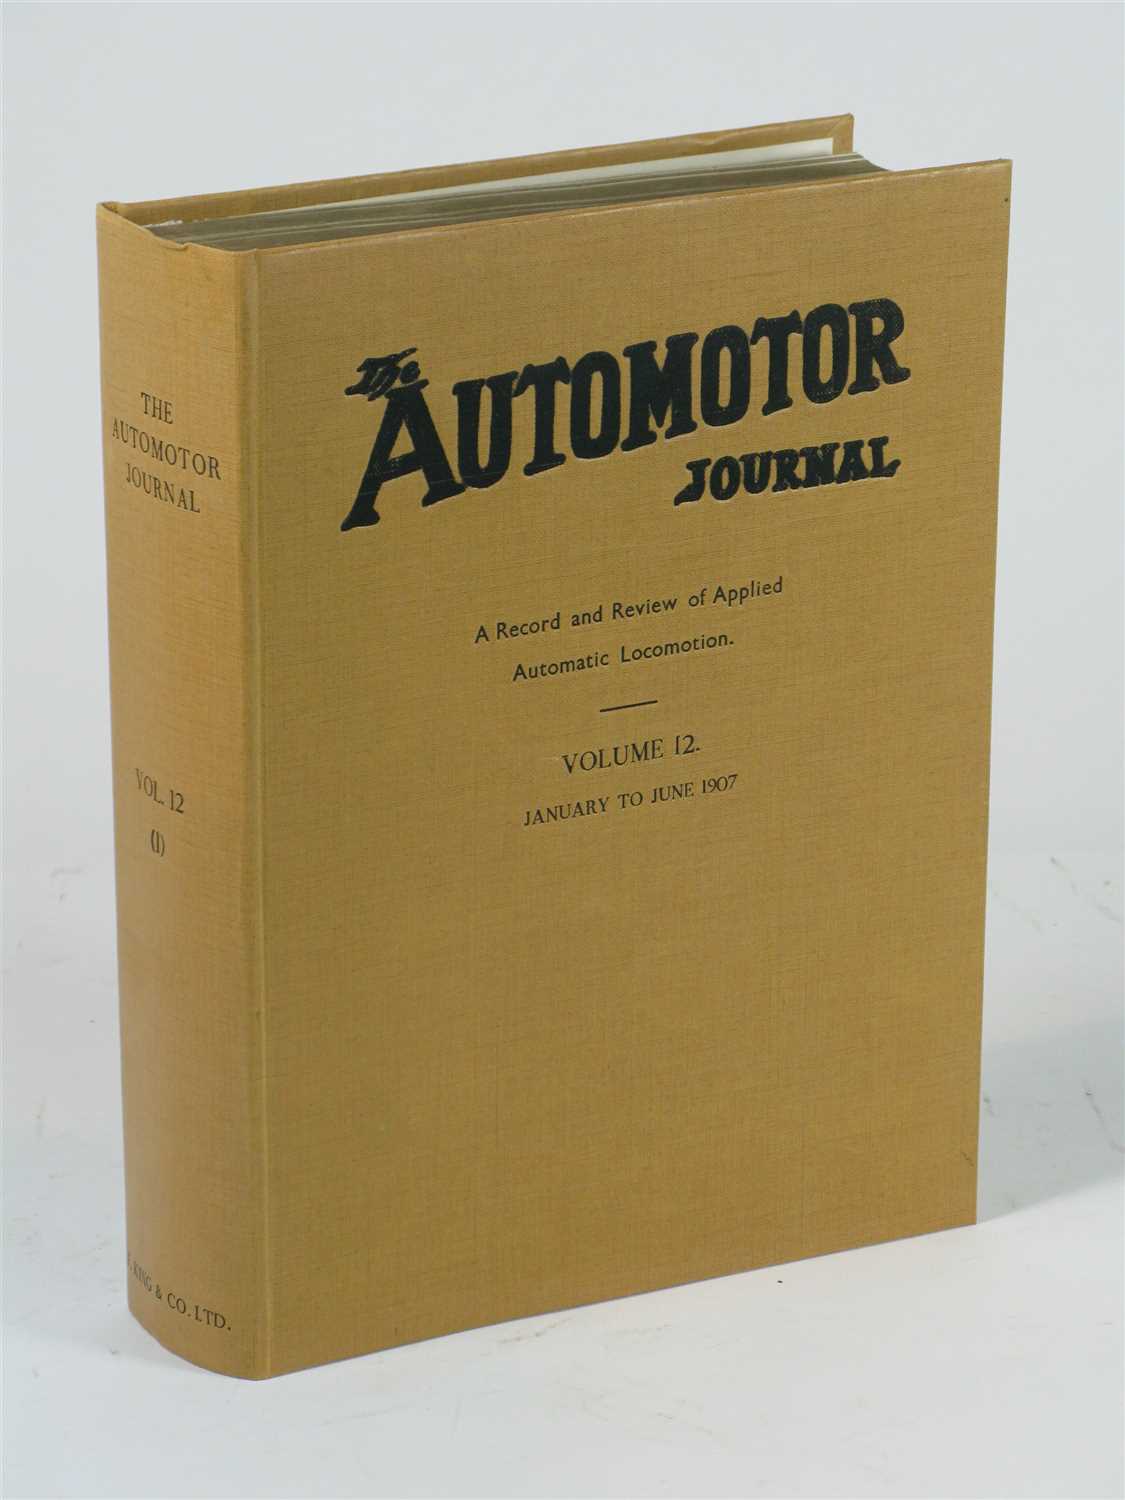 Lot 255 - The Automotor Journal.